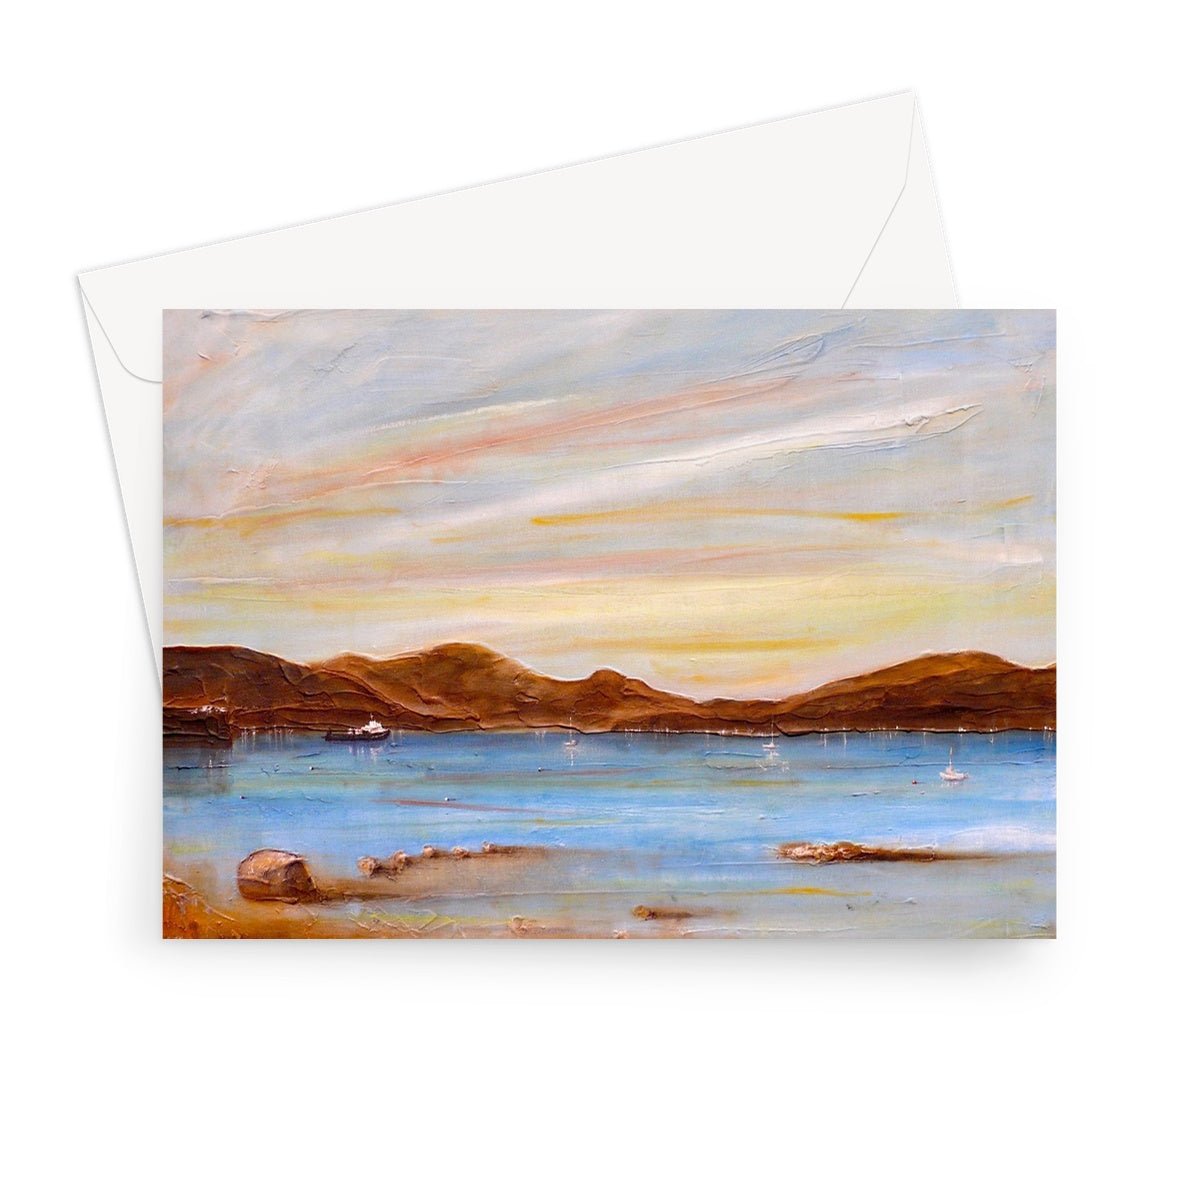 The Last Ferry To Dunoon Art Gifts Greeting Card-Greetings Cards-River Clyde Art Gallery-7"x5"-1 Card-Paintings, Prints, Homeware, Art Gifts From Scotland By Scottish Artist Kevin Hunter